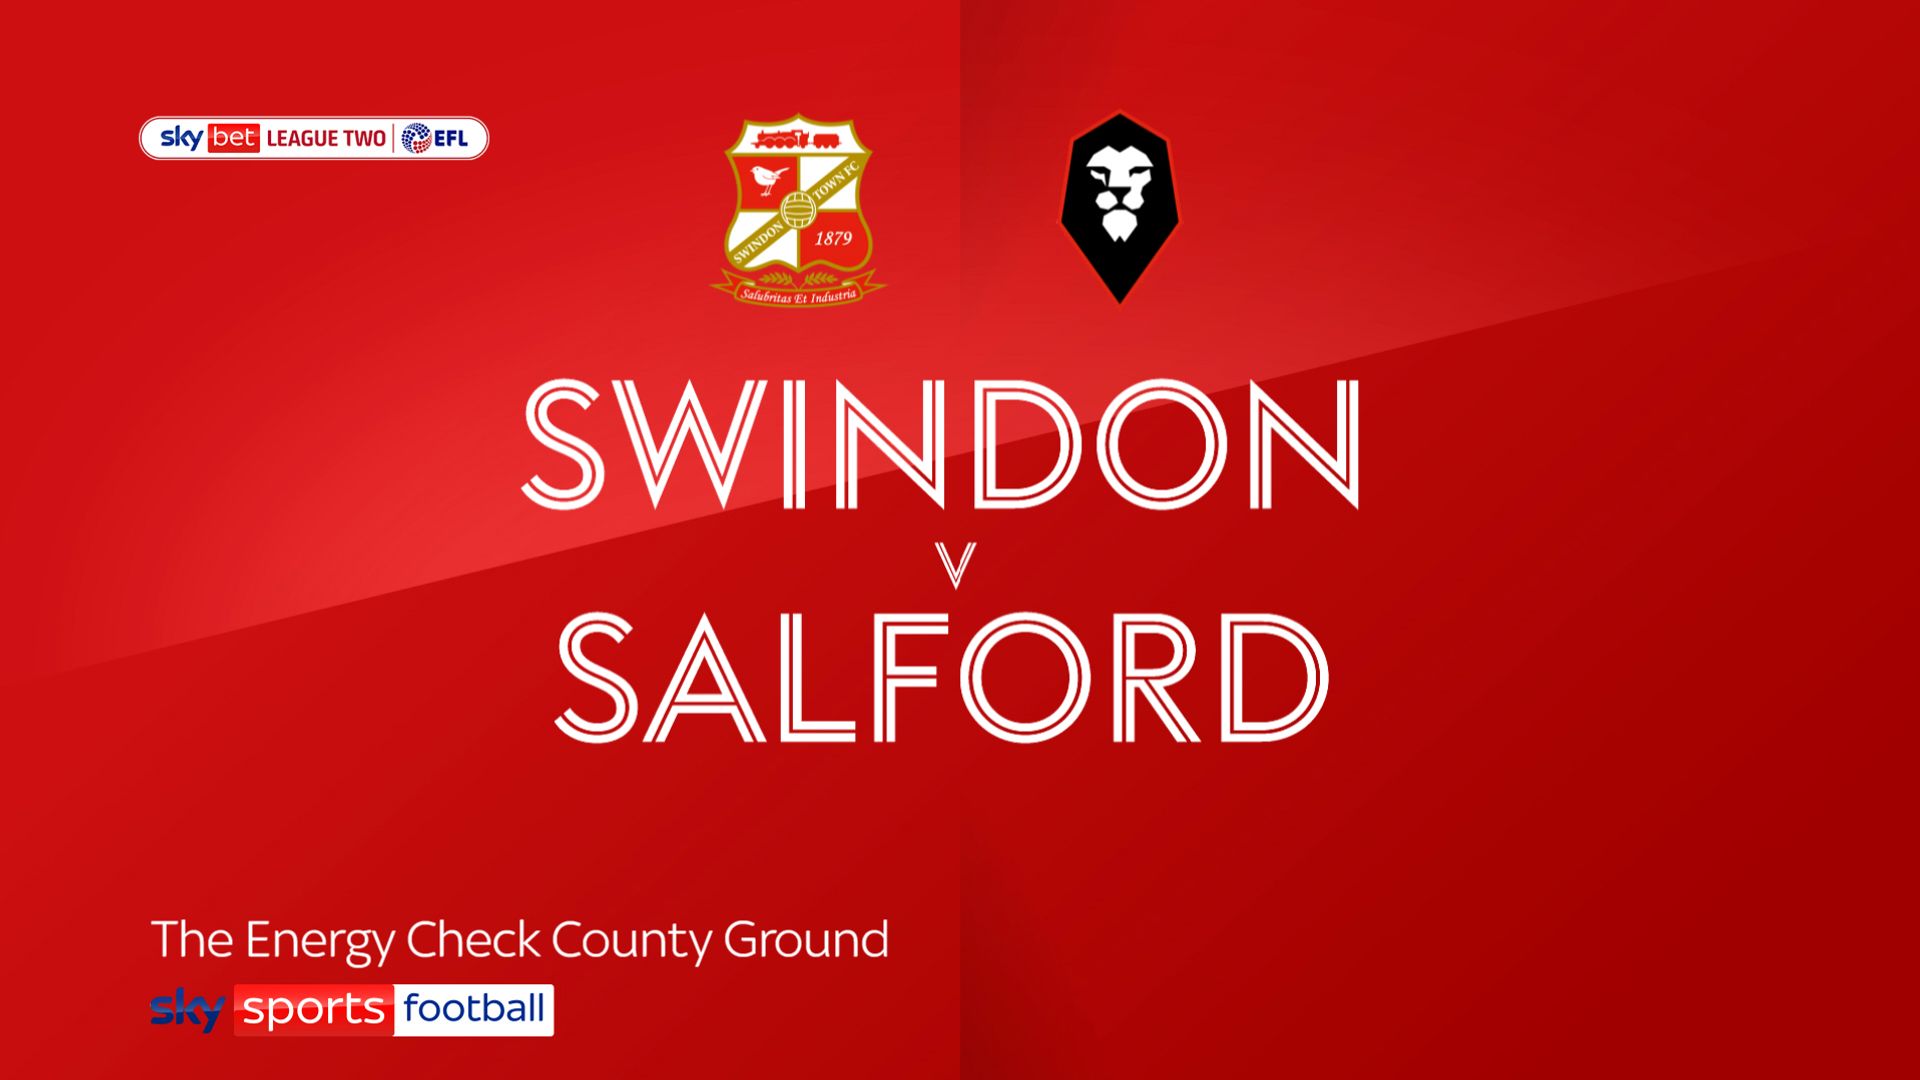 Swindon 0-0 Salford: Harry McKirdy sent off in stalemate at County Ground